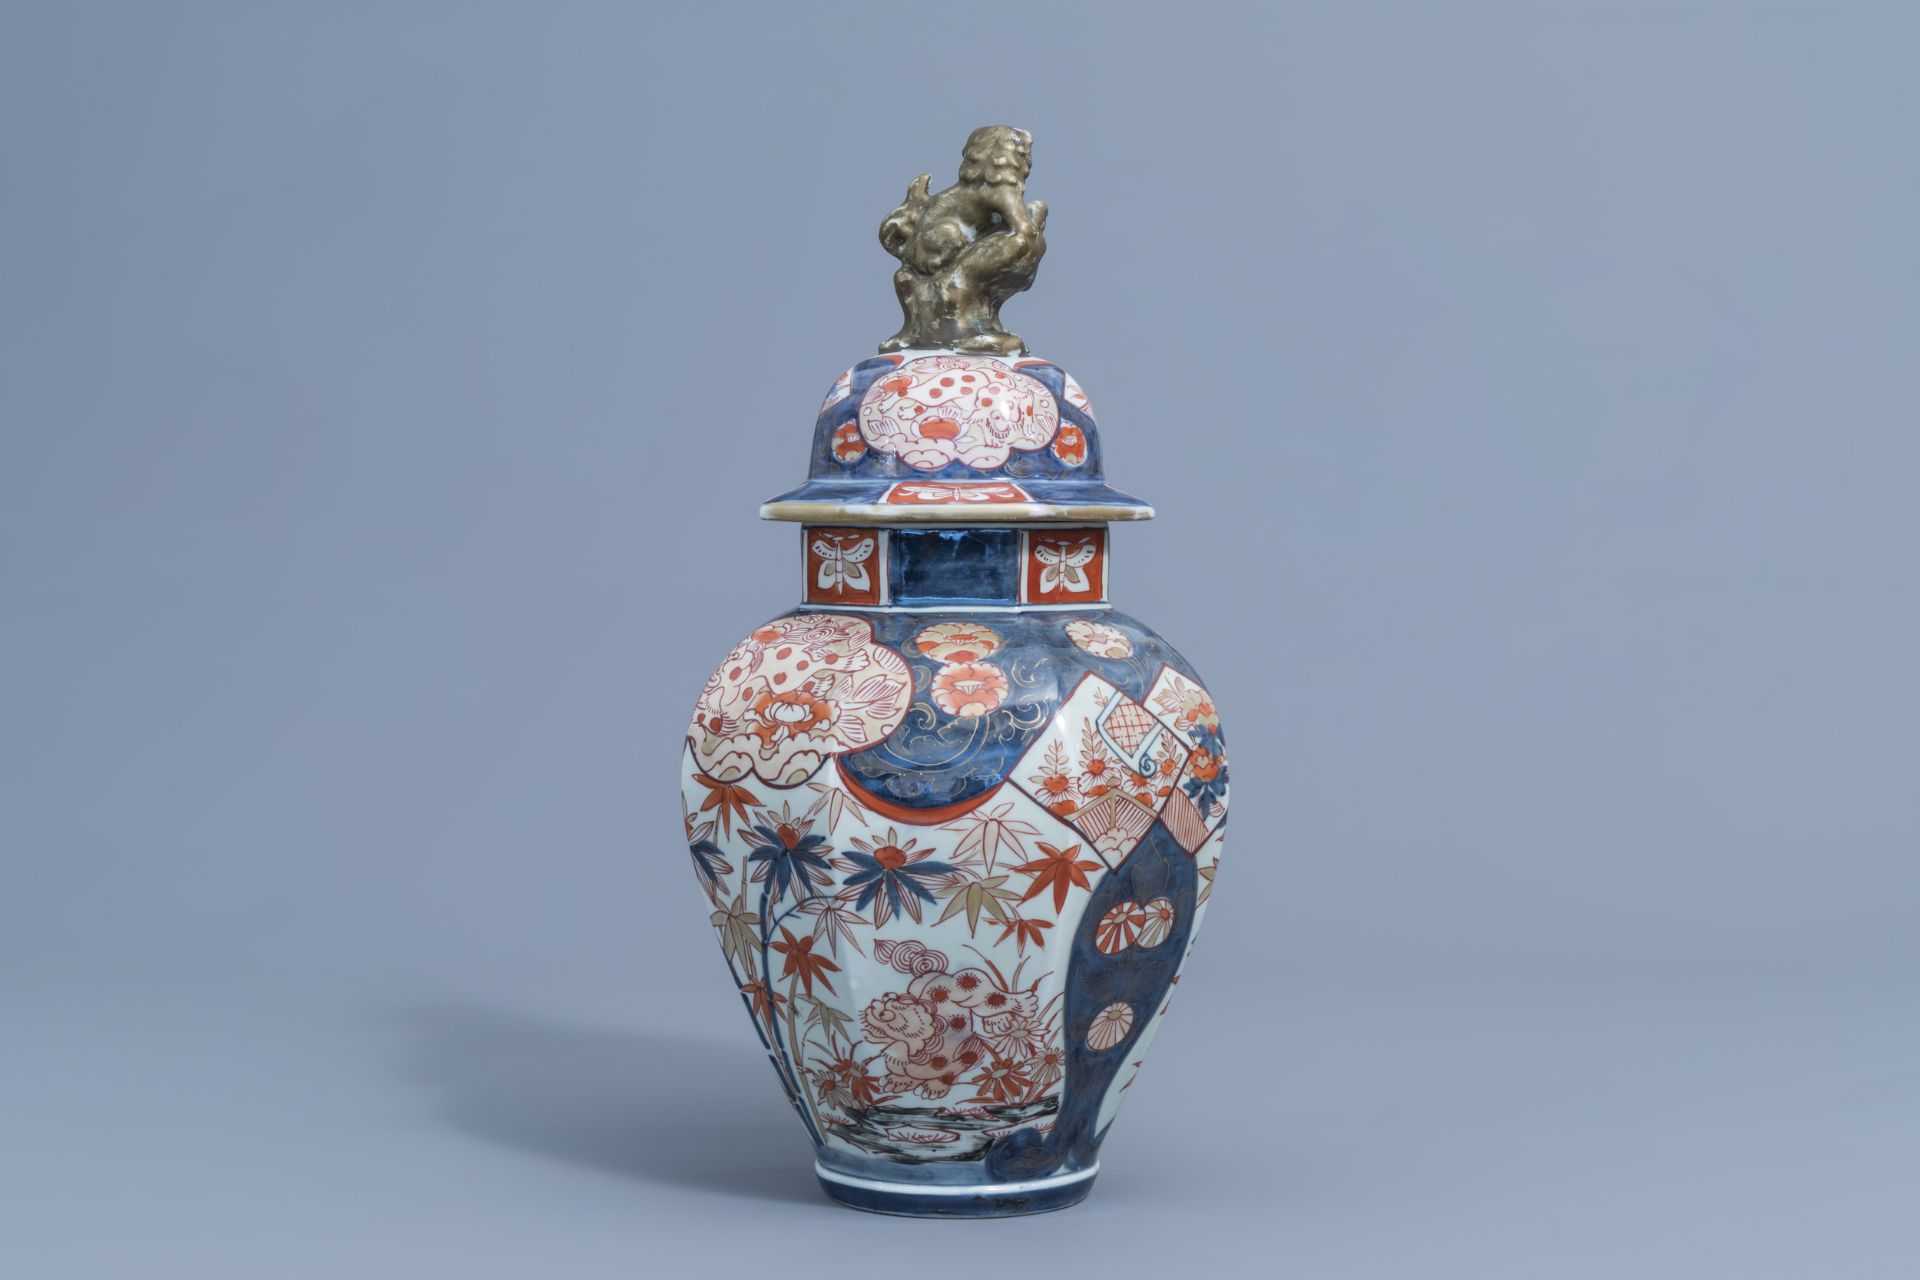 A Japanese Imari vase and cover and a pair of bronze stands with animals, Edo/Meiji, 18de/19de eeuw - Image 4 of 13